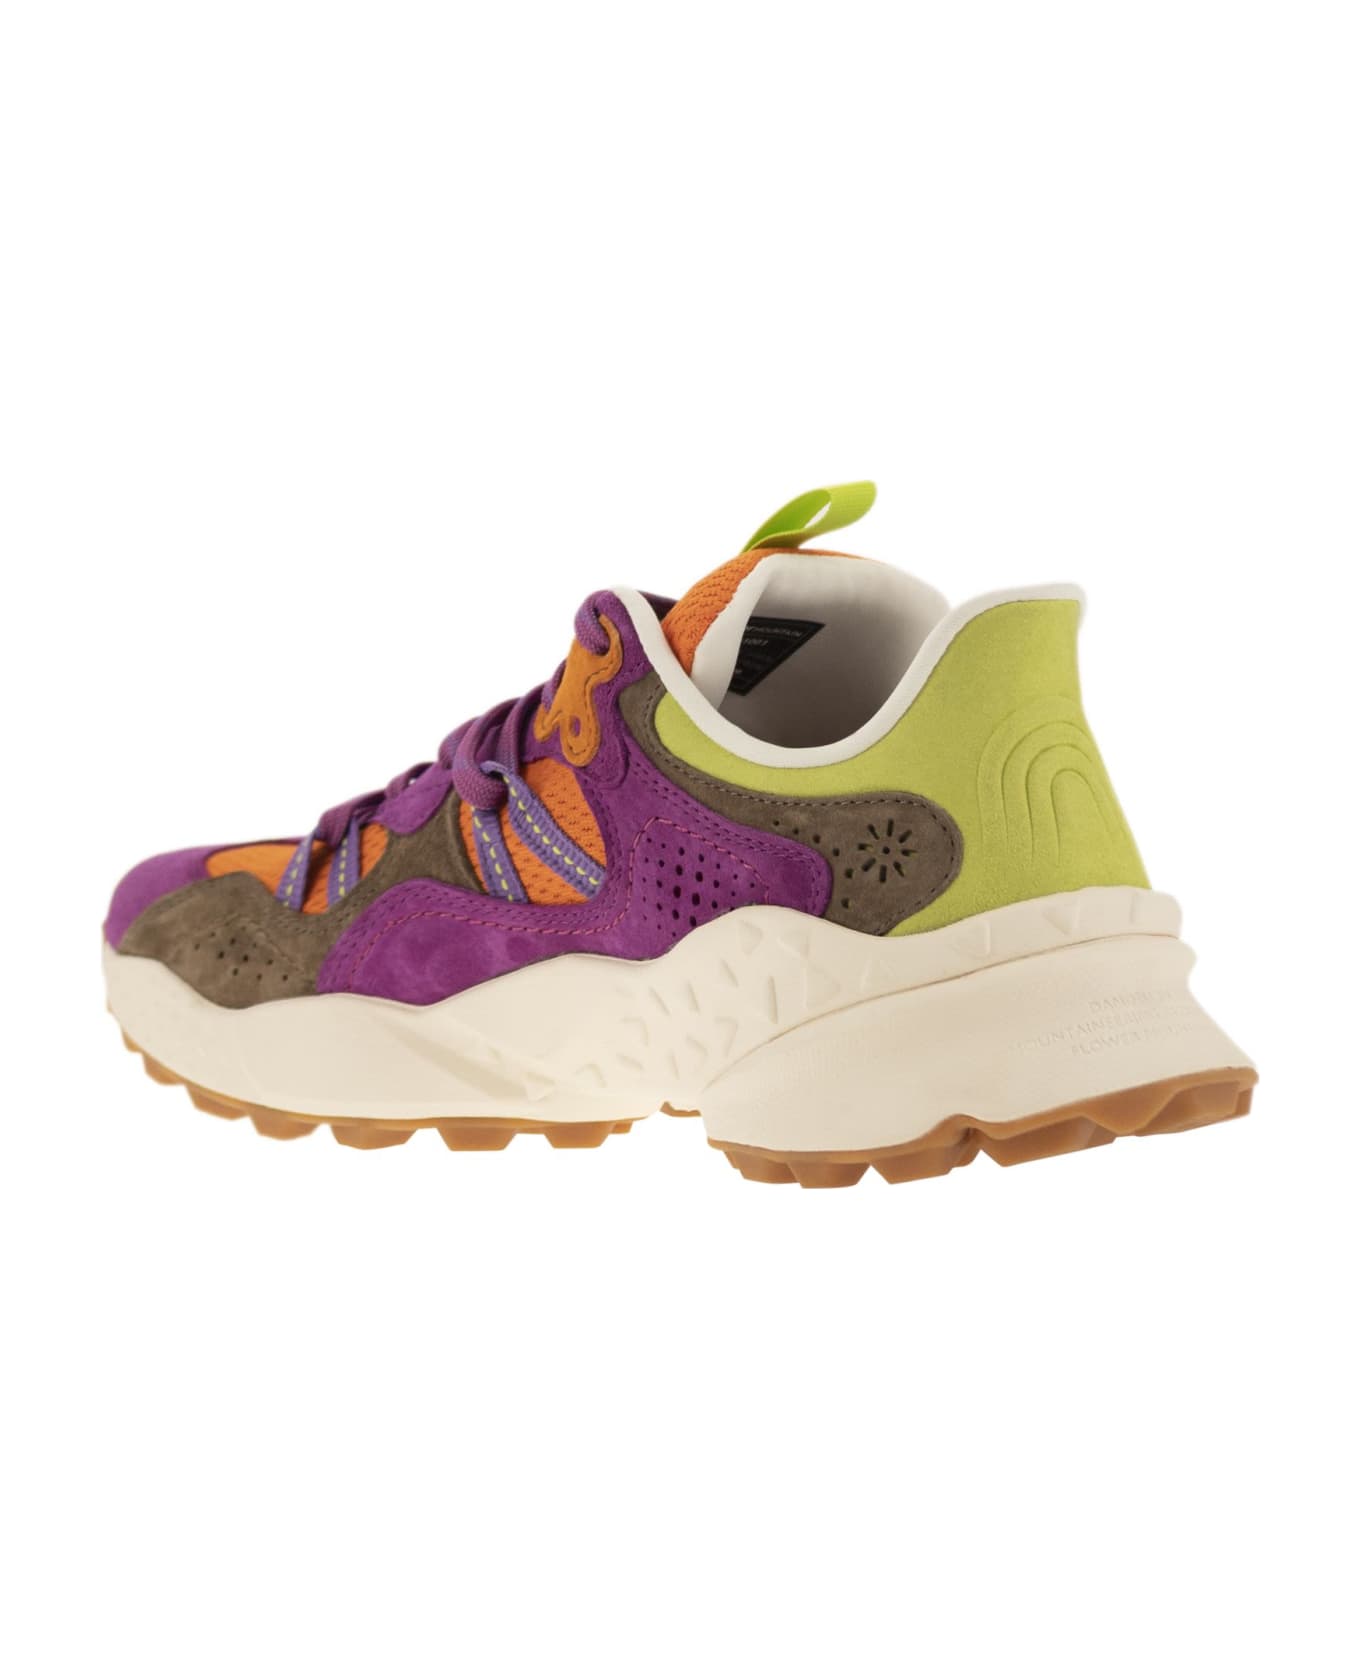 Flower Mountain Tiger - Sneakers In Suede And Technical Fabric - Fuchsia